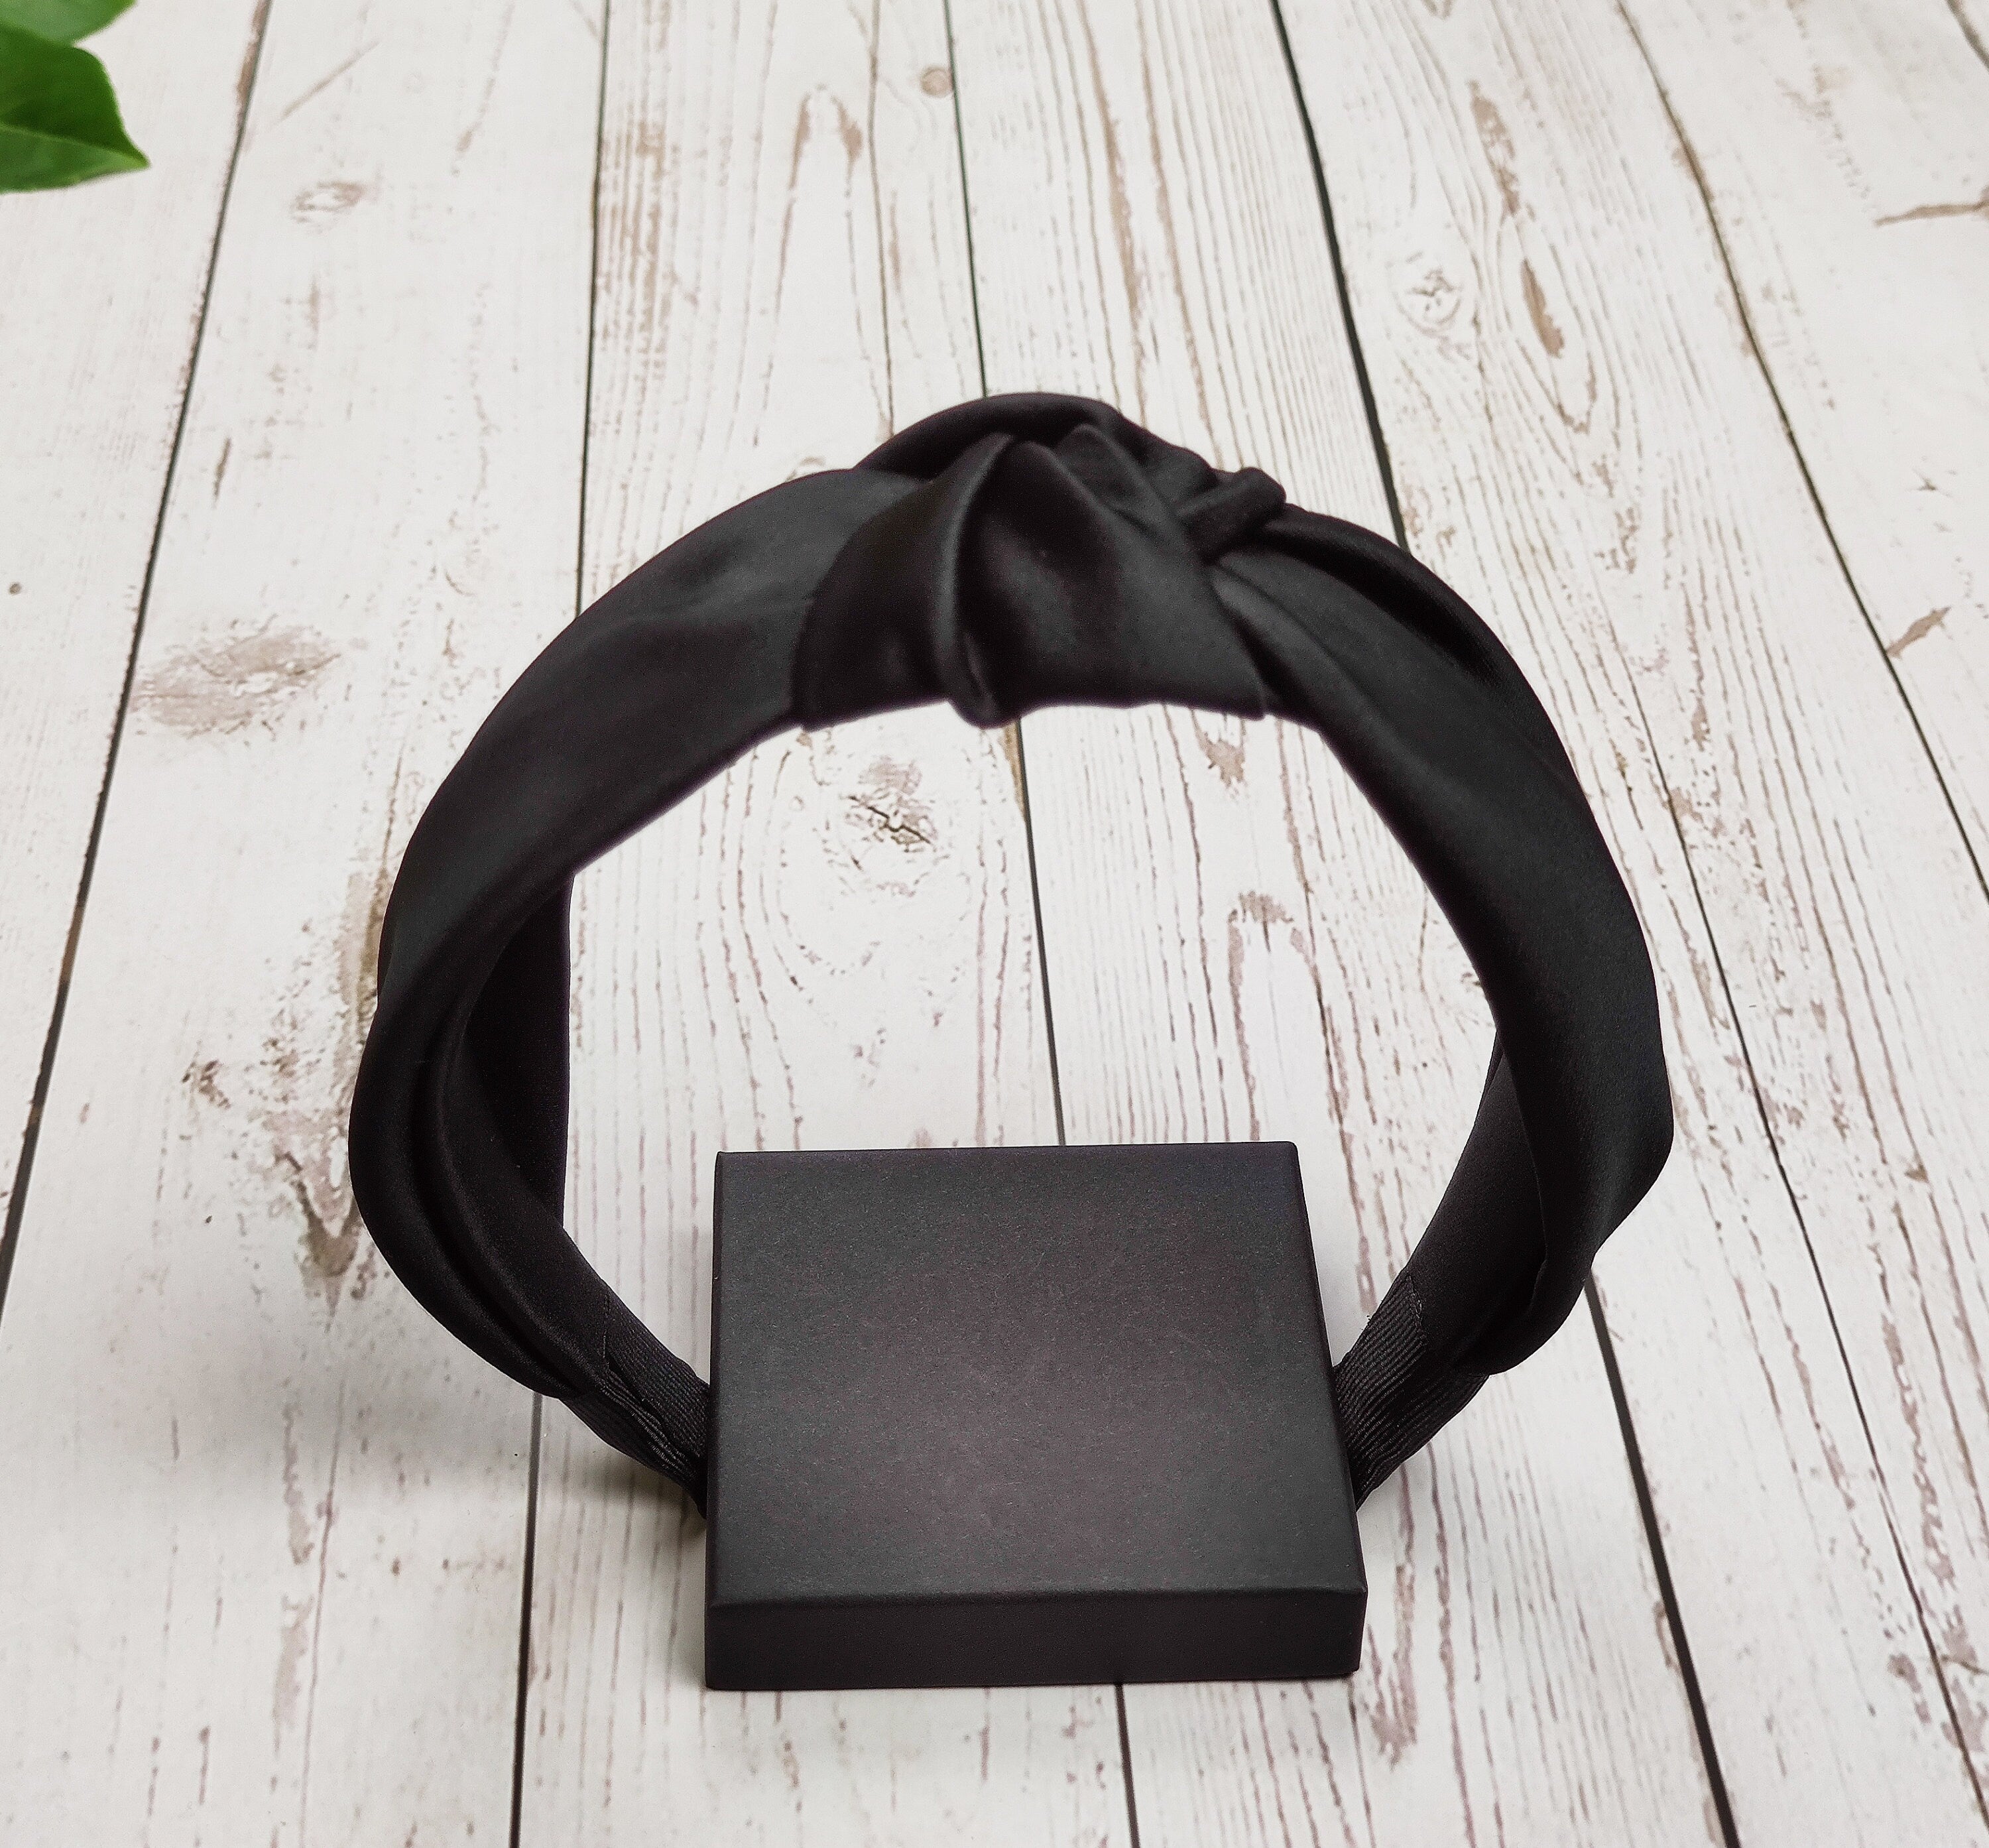 Black Satin Knotted Headband for Women - A Chic and Stylish Hair Accessory without padded